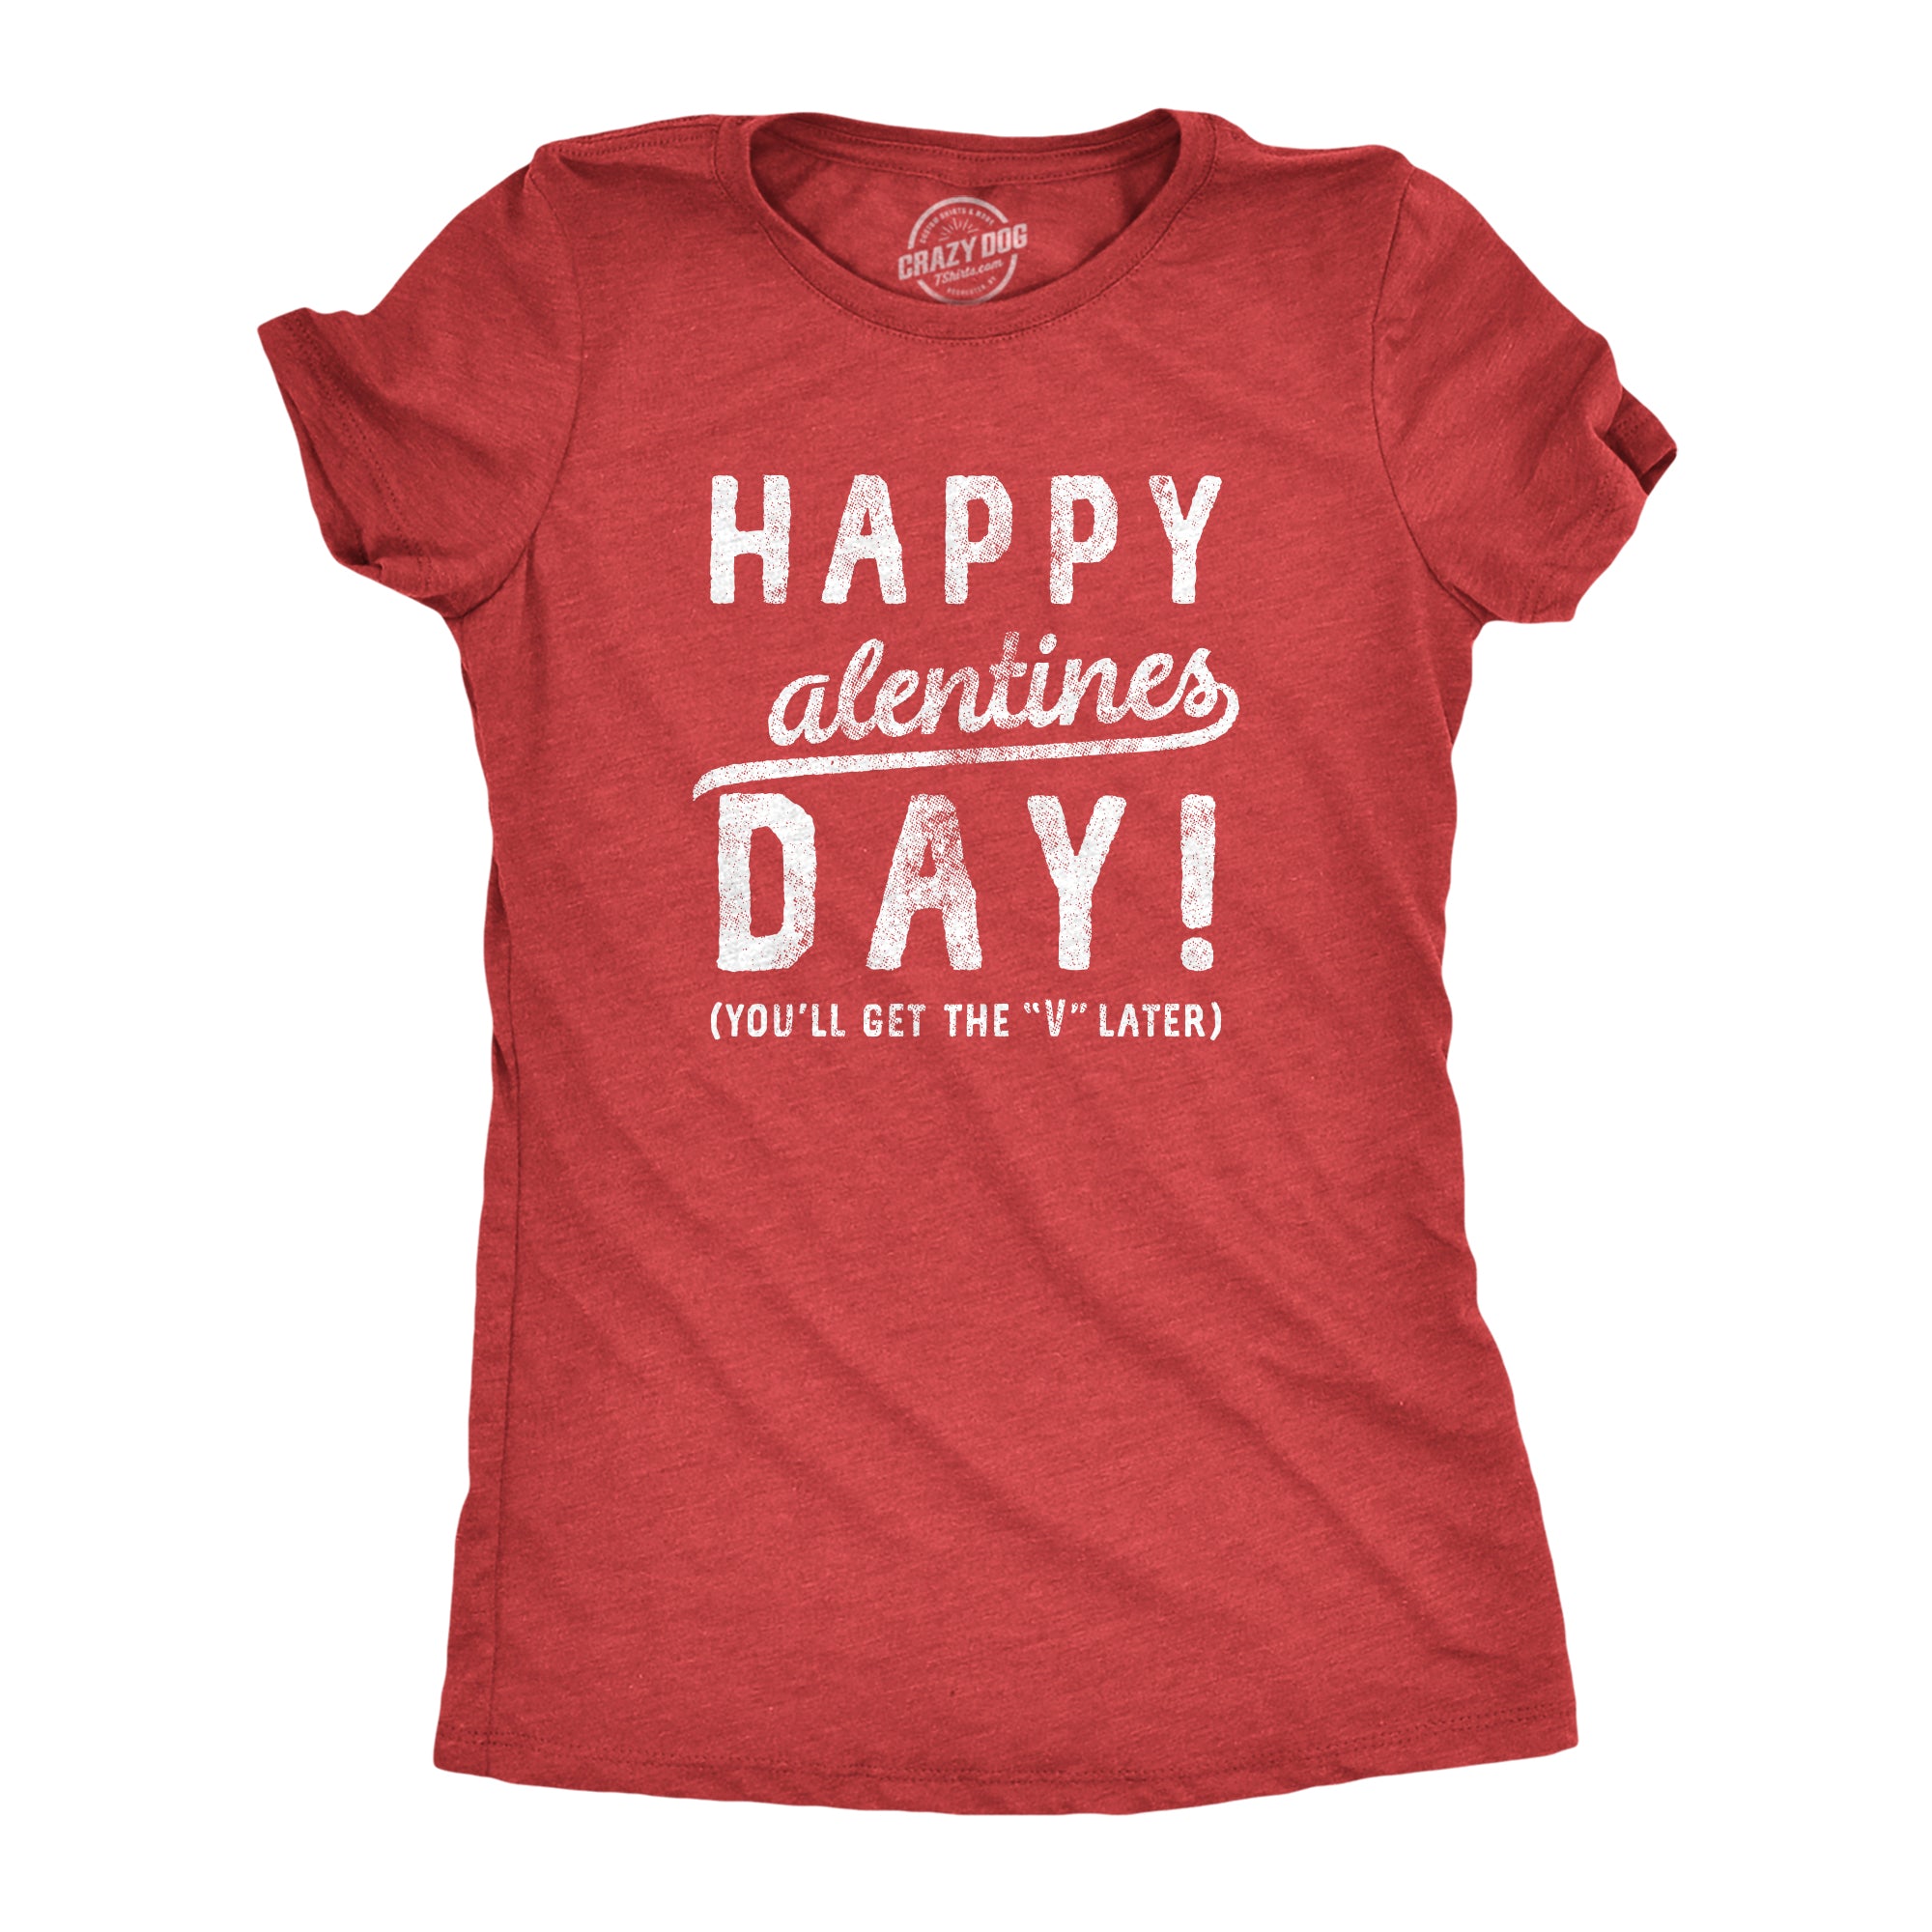 Funny Heather Red - ALENTINES Happy Alentines Day Womens T Shirt Nerdy Valentine's Day sex Tee